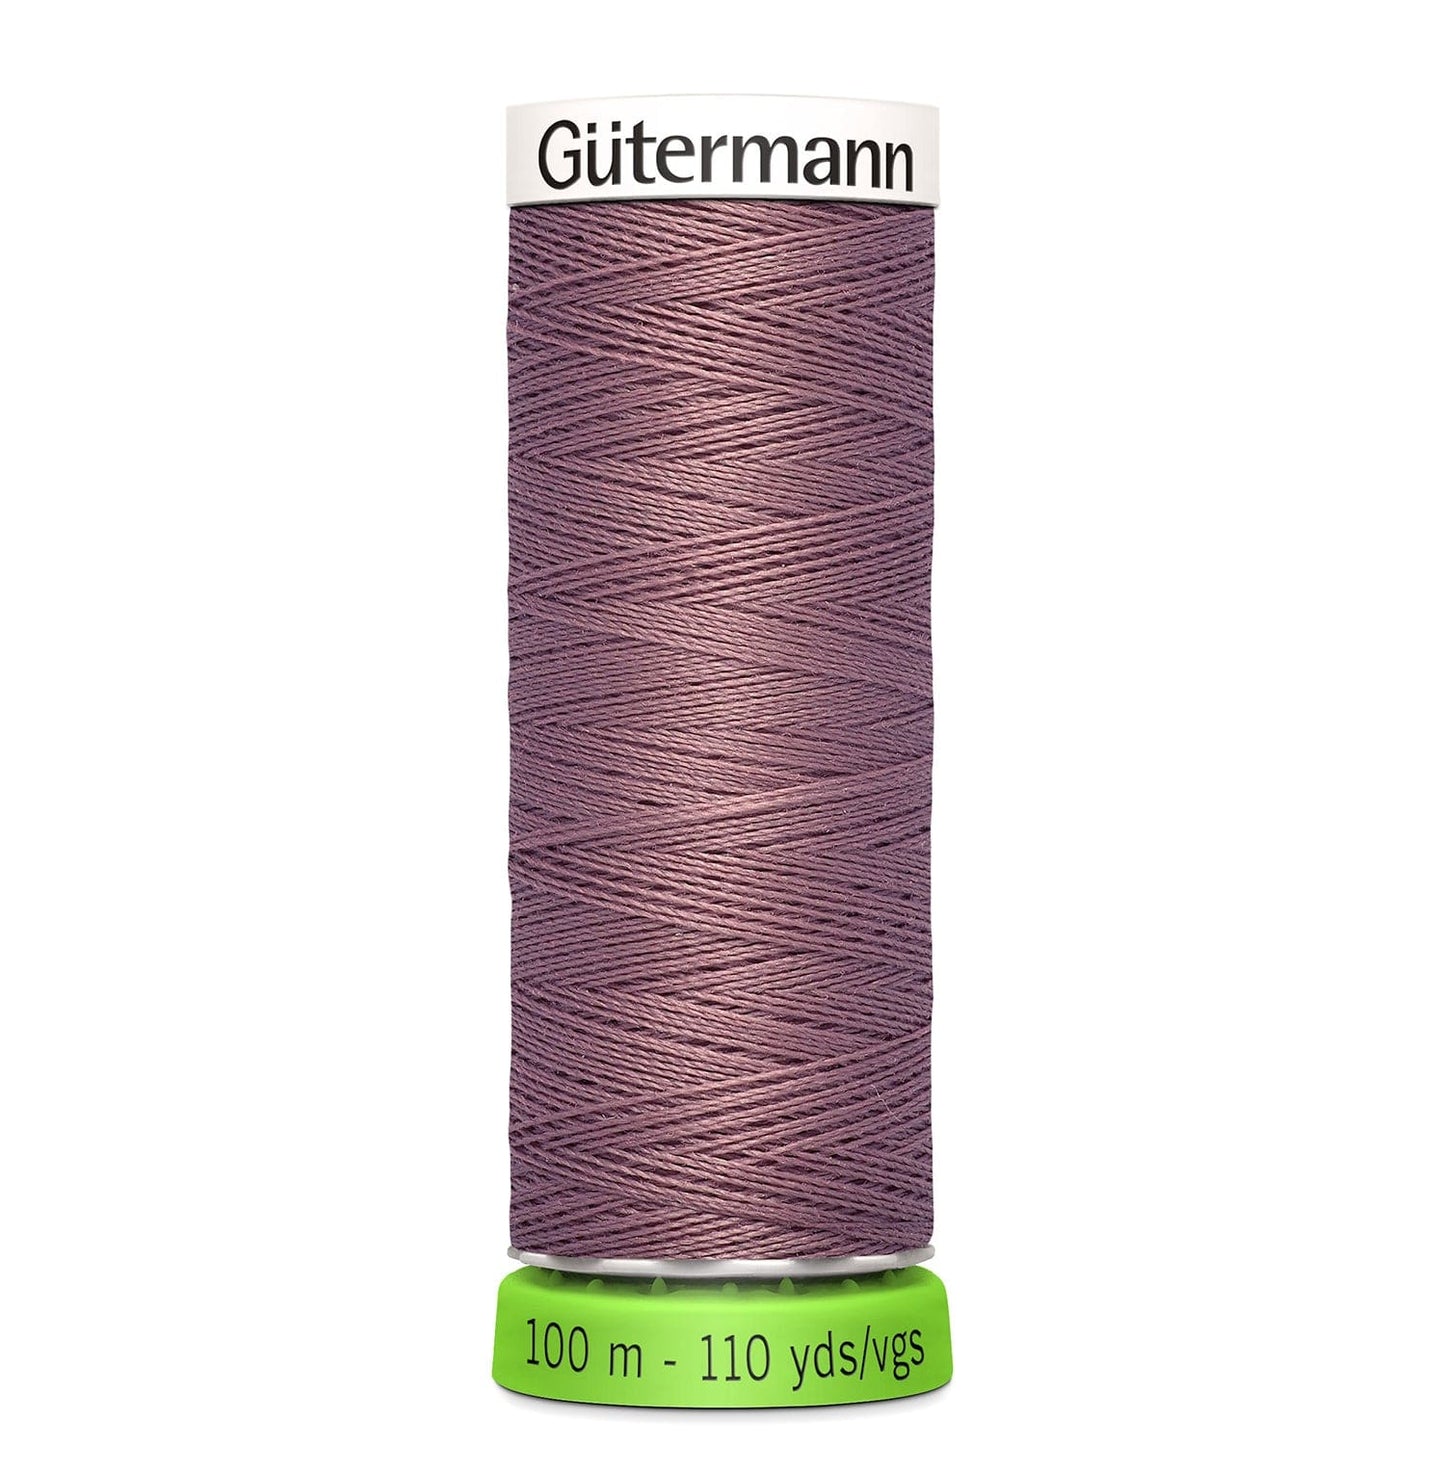 100 m Reel Gütermann Recycled Sew-All Thread in Dusky Mauve no. 52